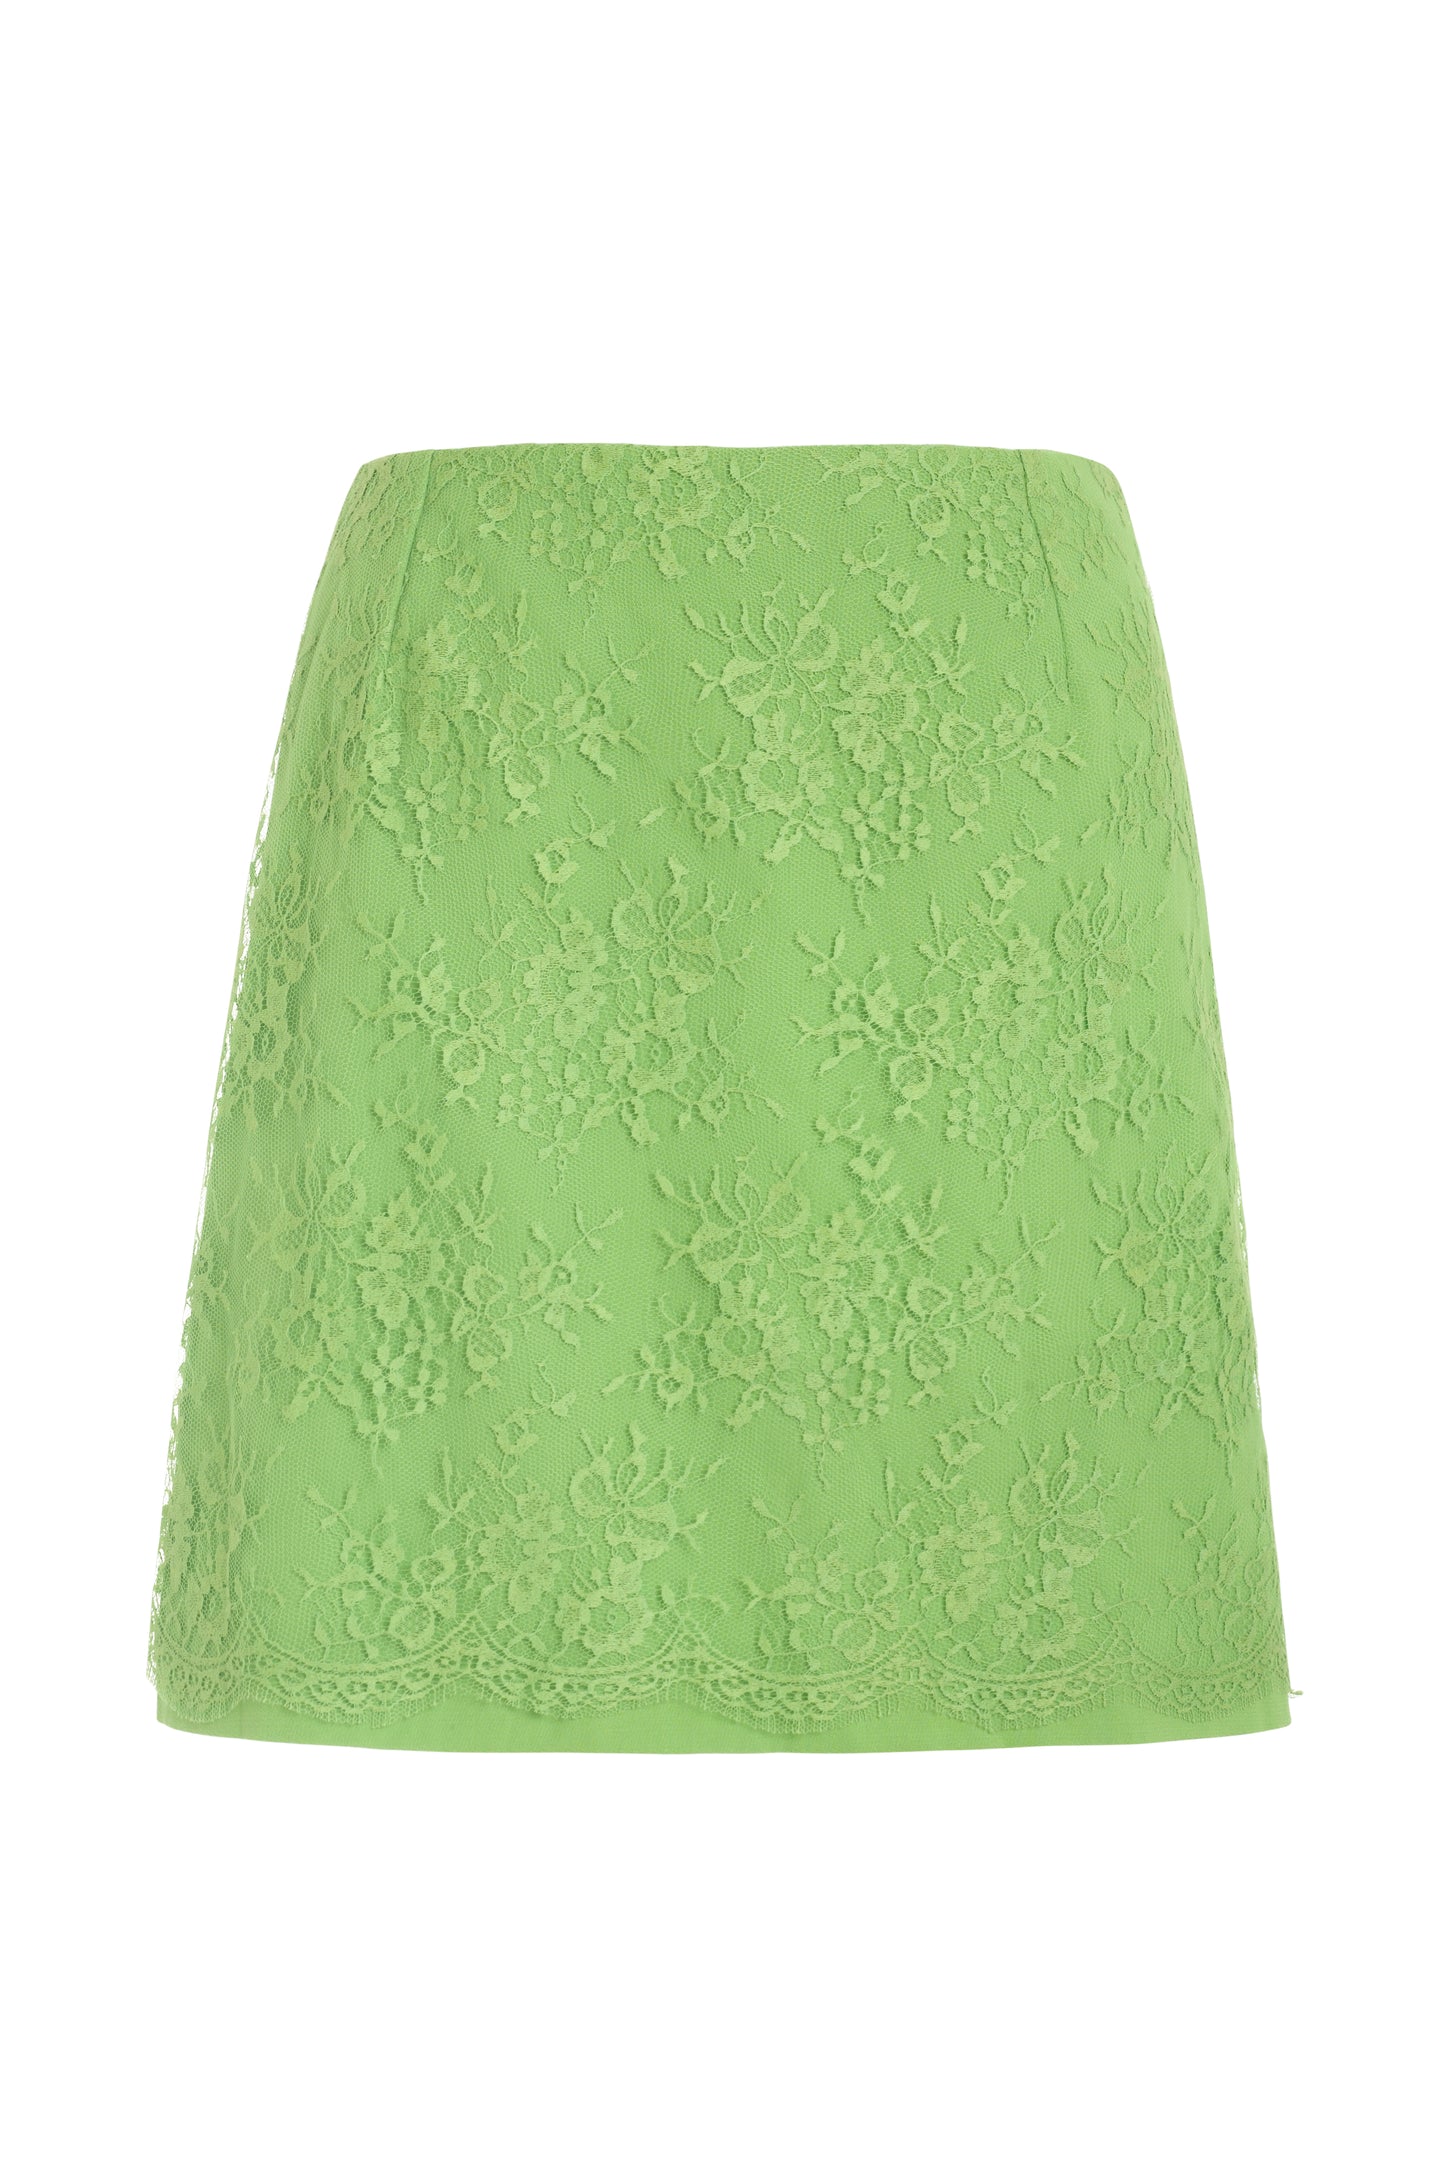 Gianni Versace Couture apple green skirt with floral lace overlay